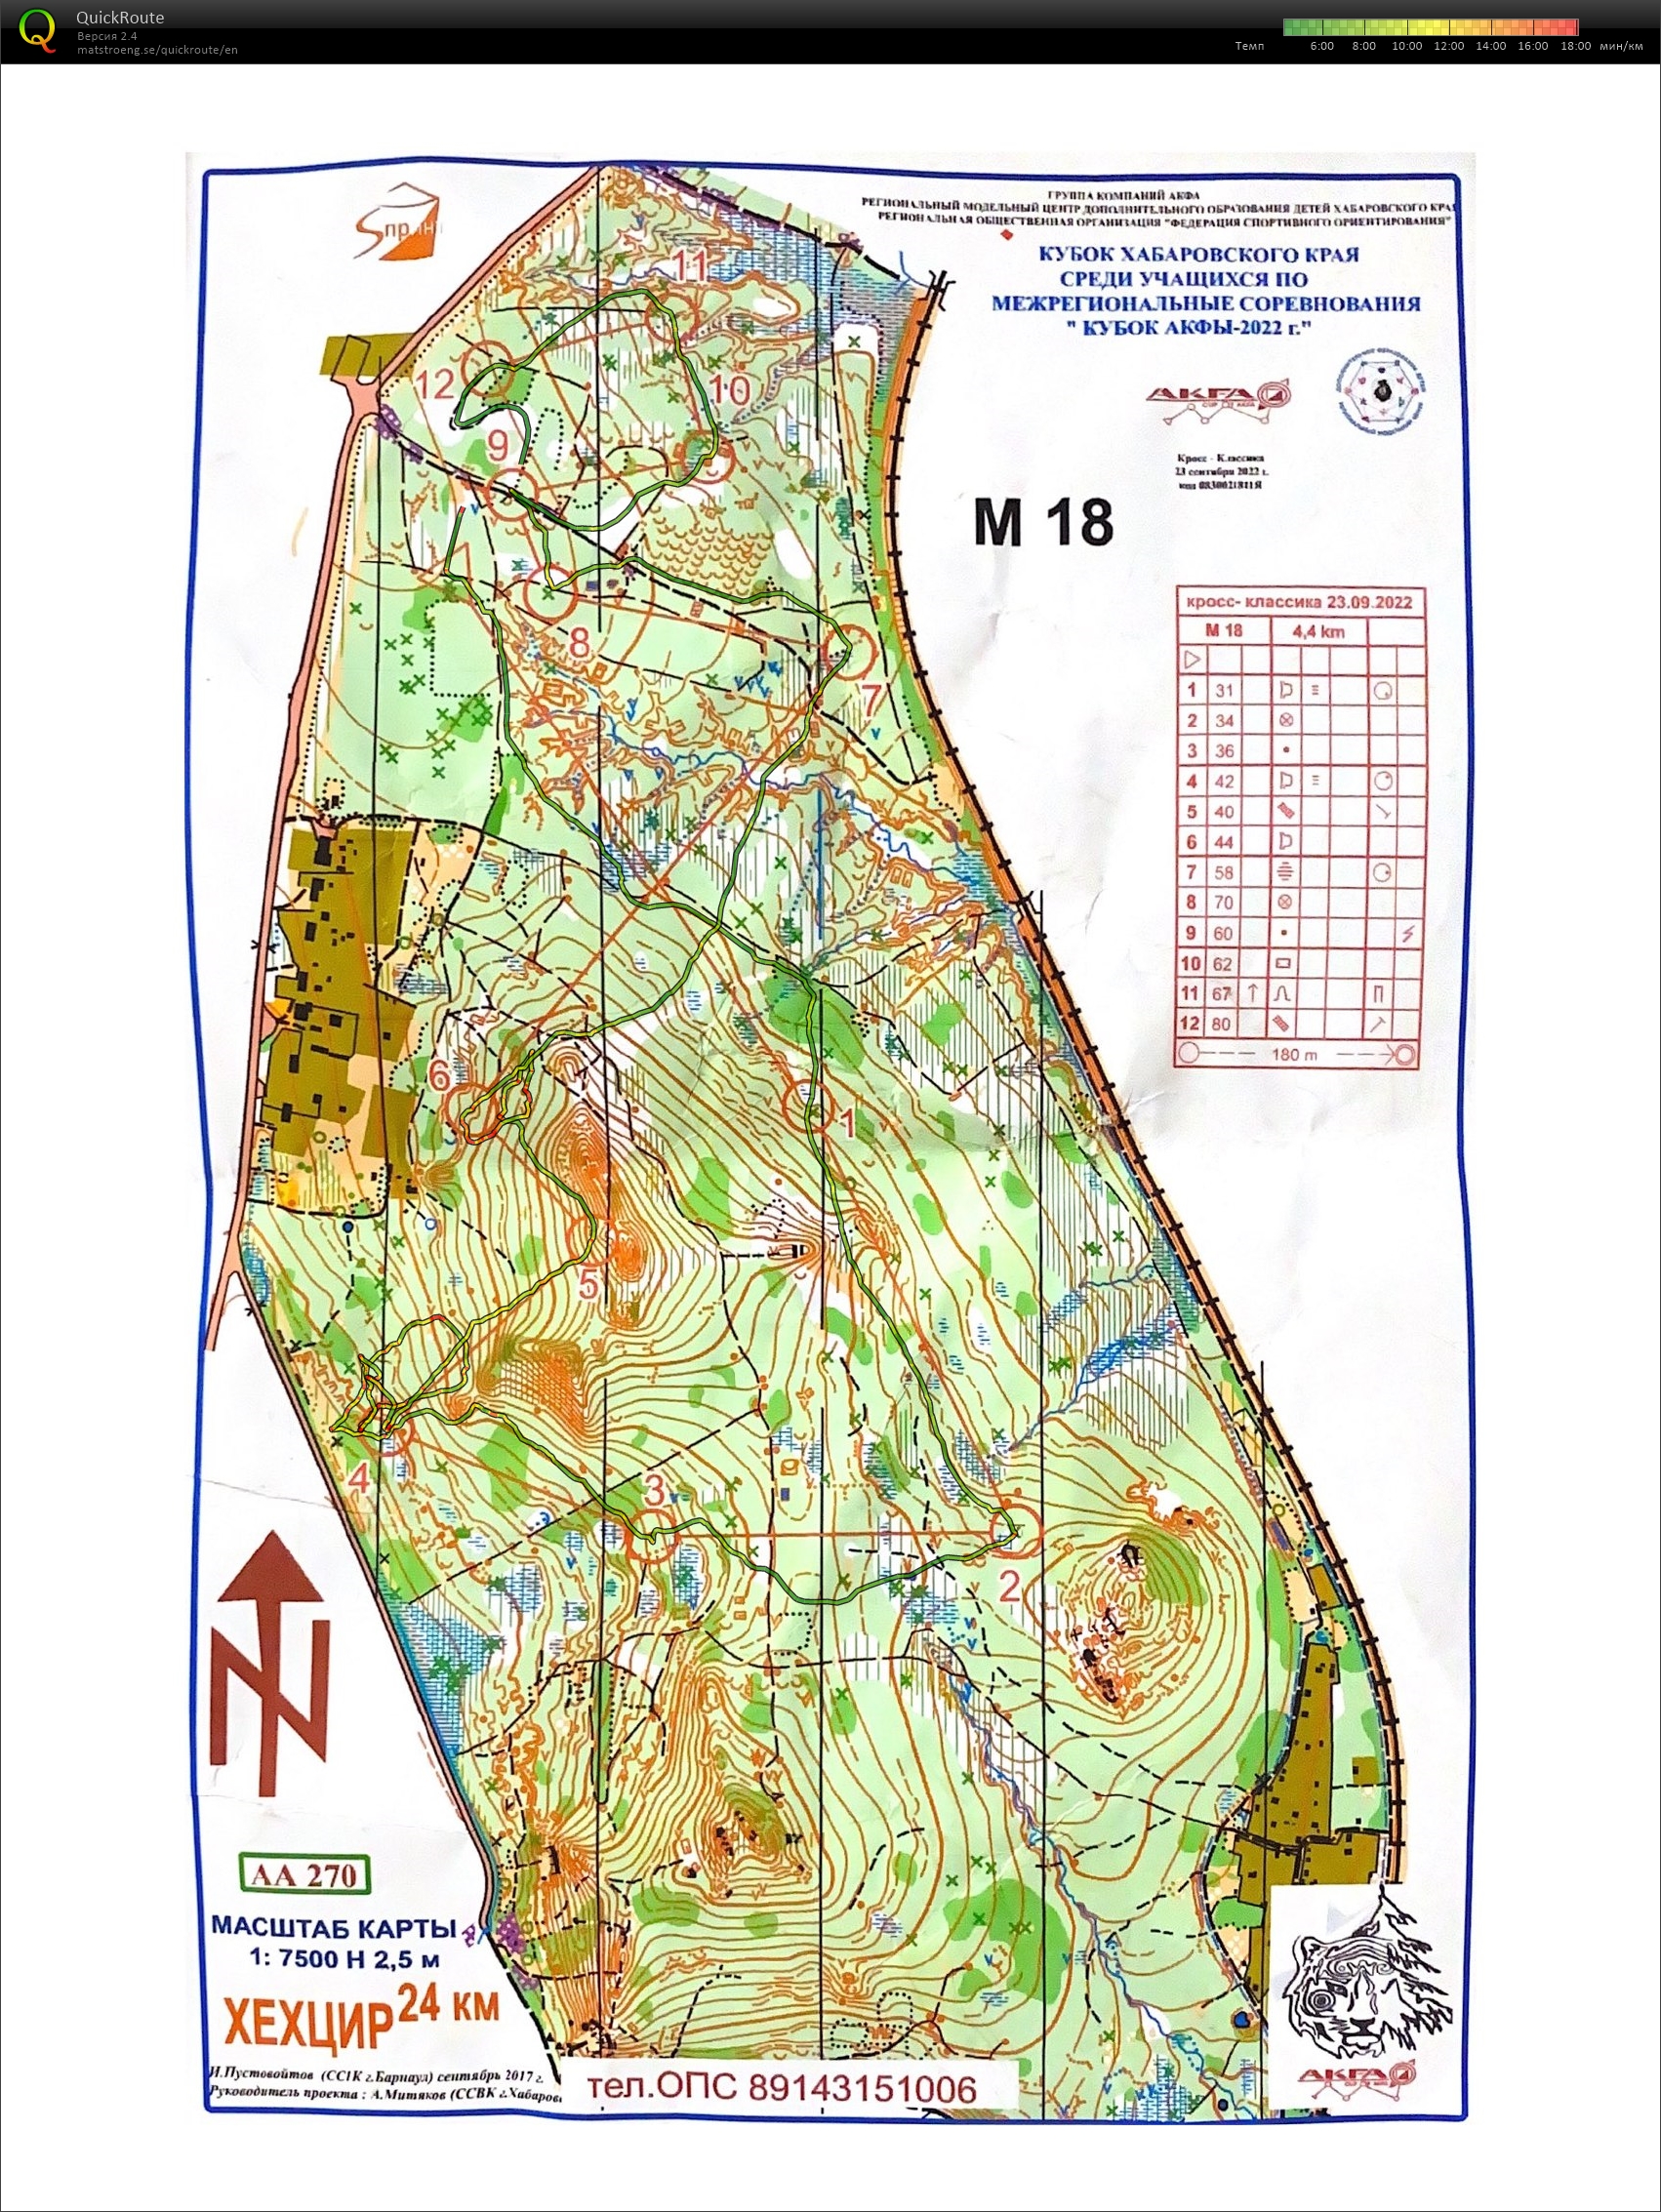 Map with track - Кубок Акфы Финал, area - Хехцир, from orienteering map archive of Konstantin Borodin